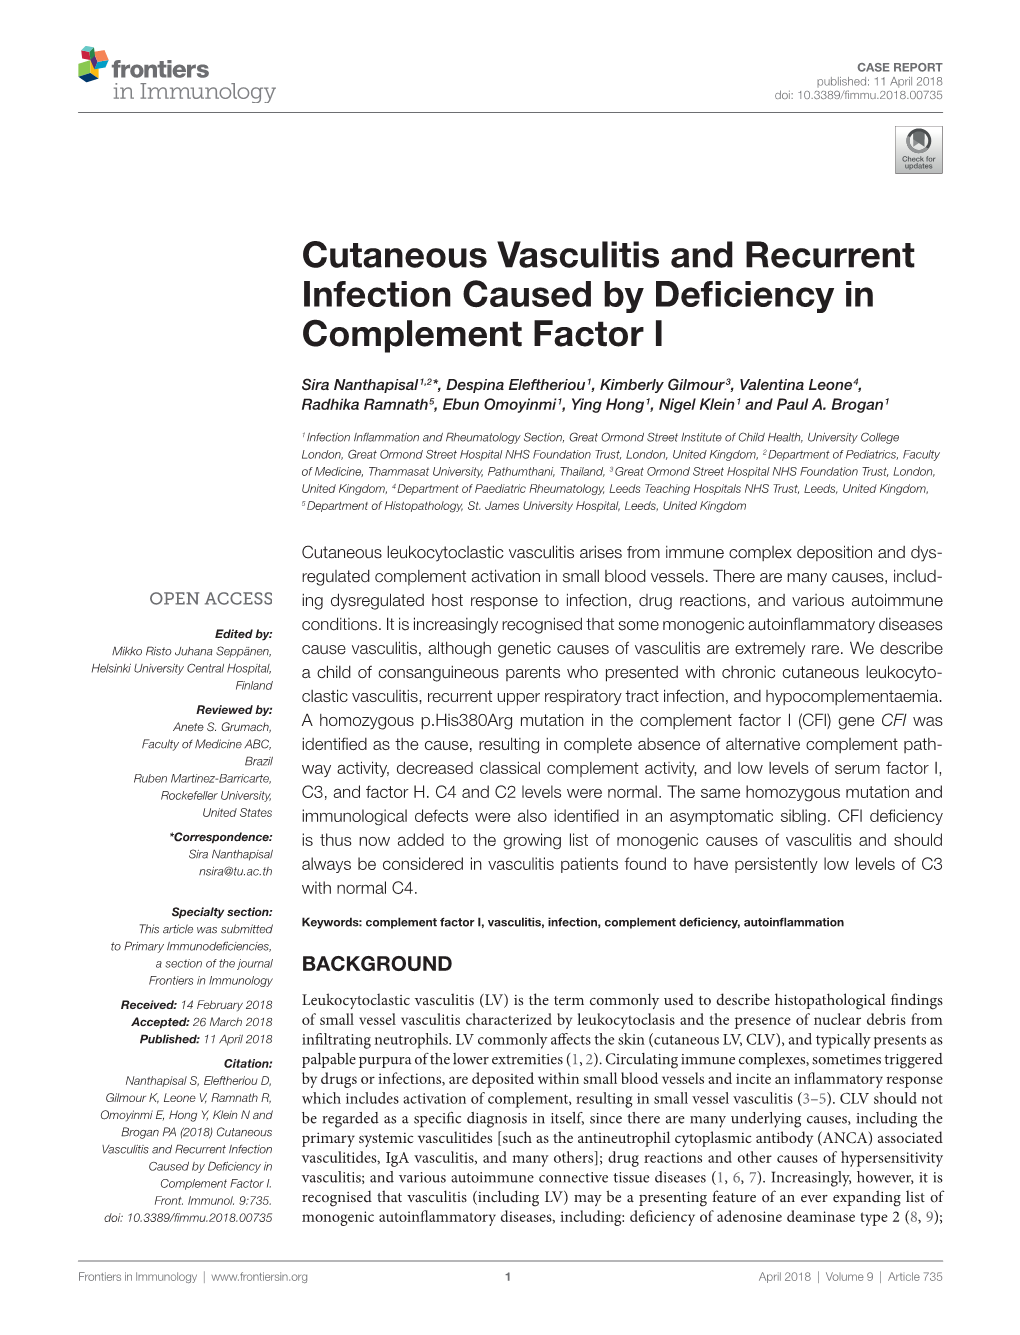 Cutaneous Vasculitis and Recurrent Infection Caused by Deficiency in Complement Factor I